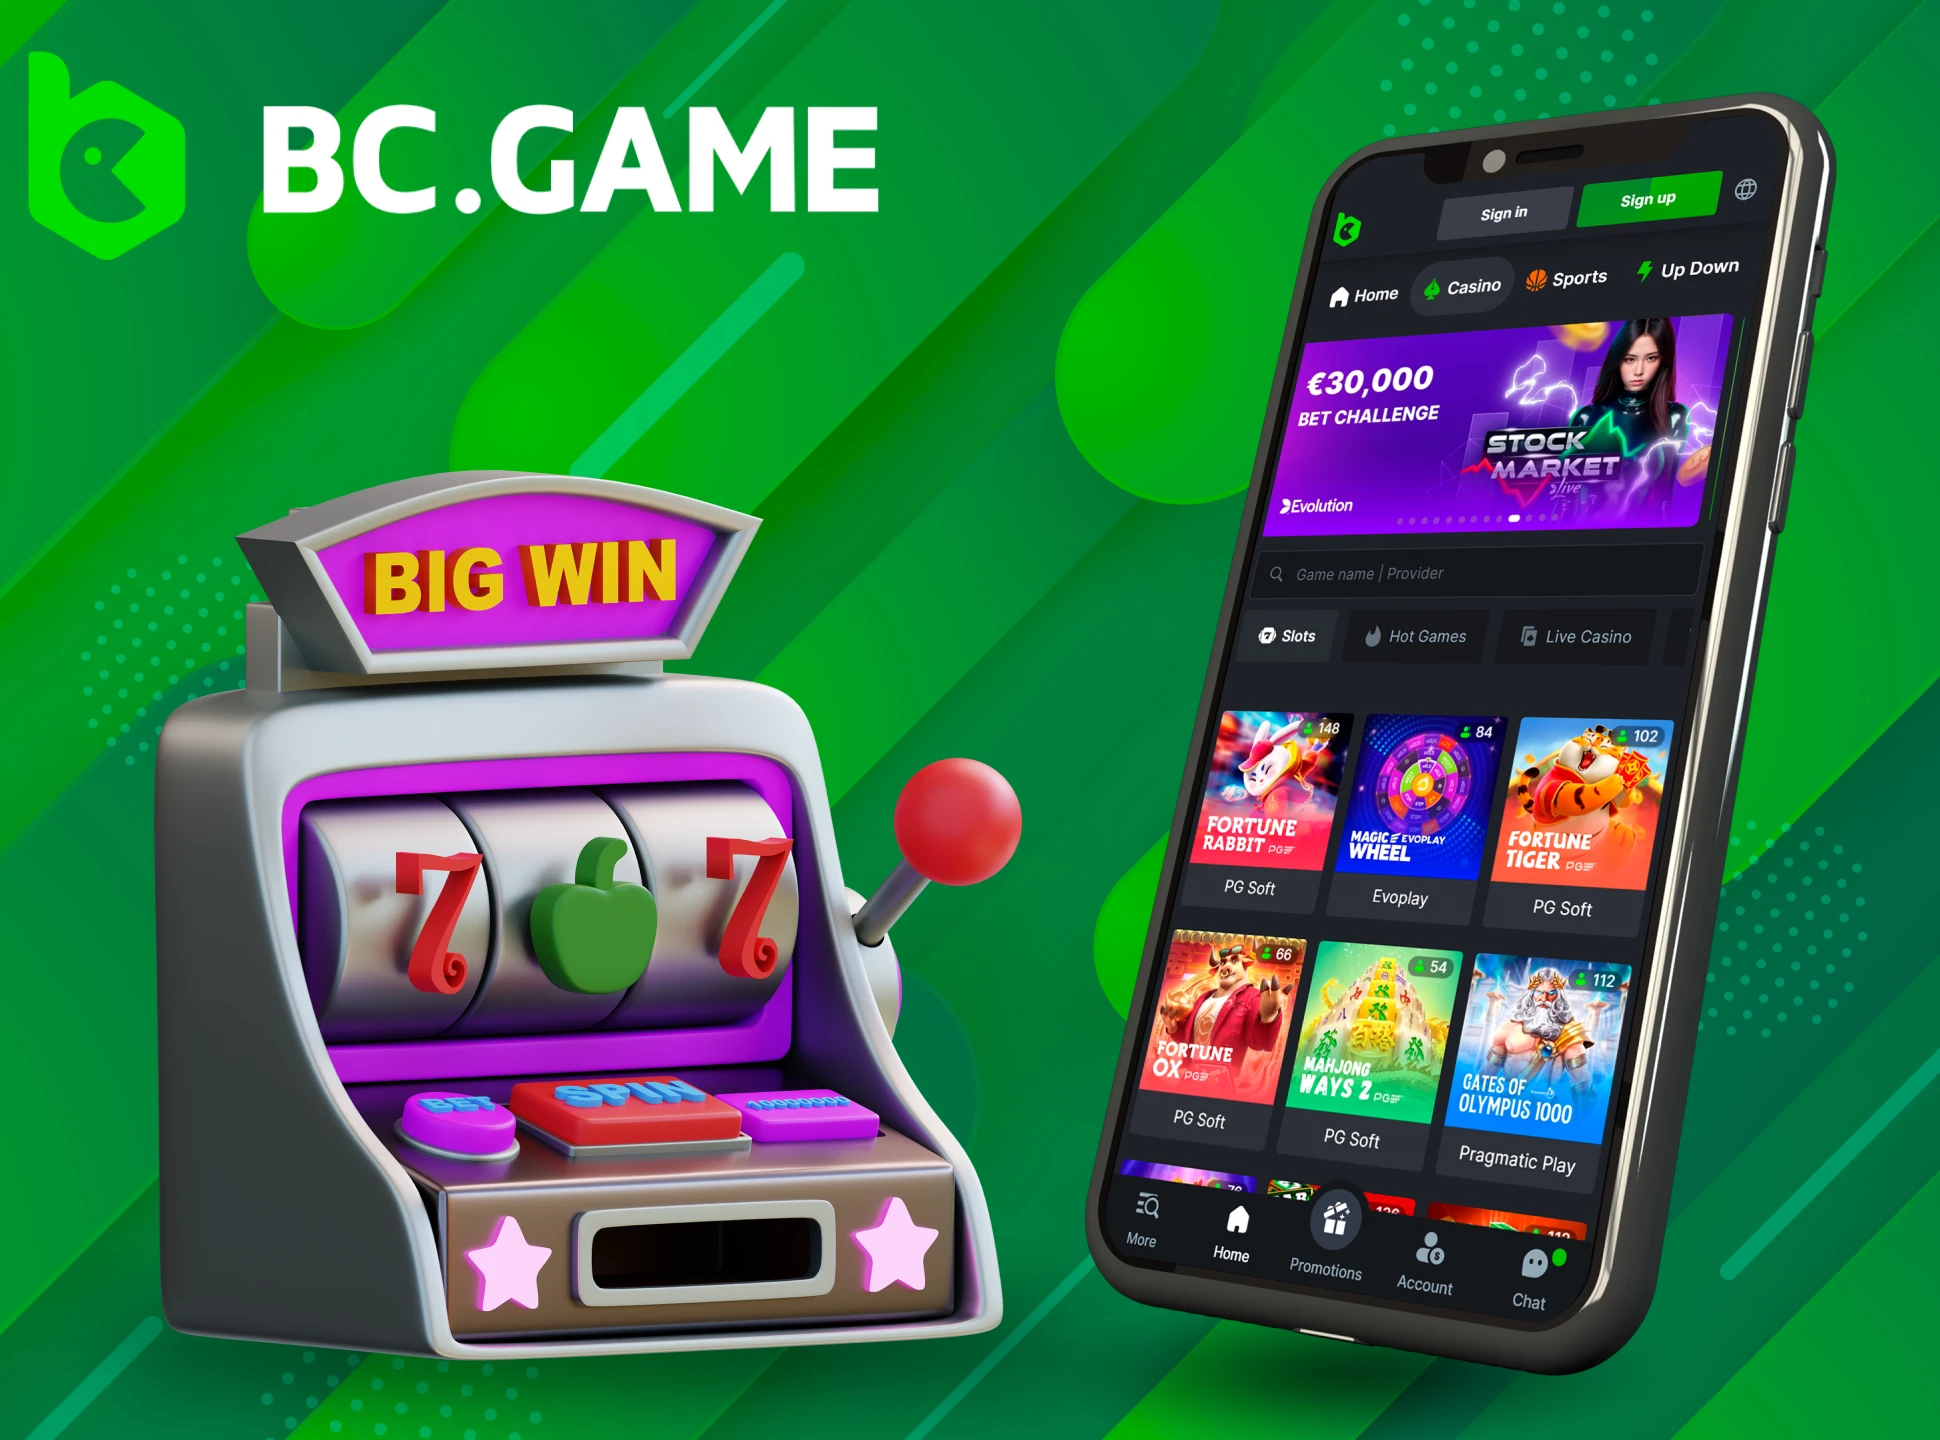 Play popular slots in the BC Game app.